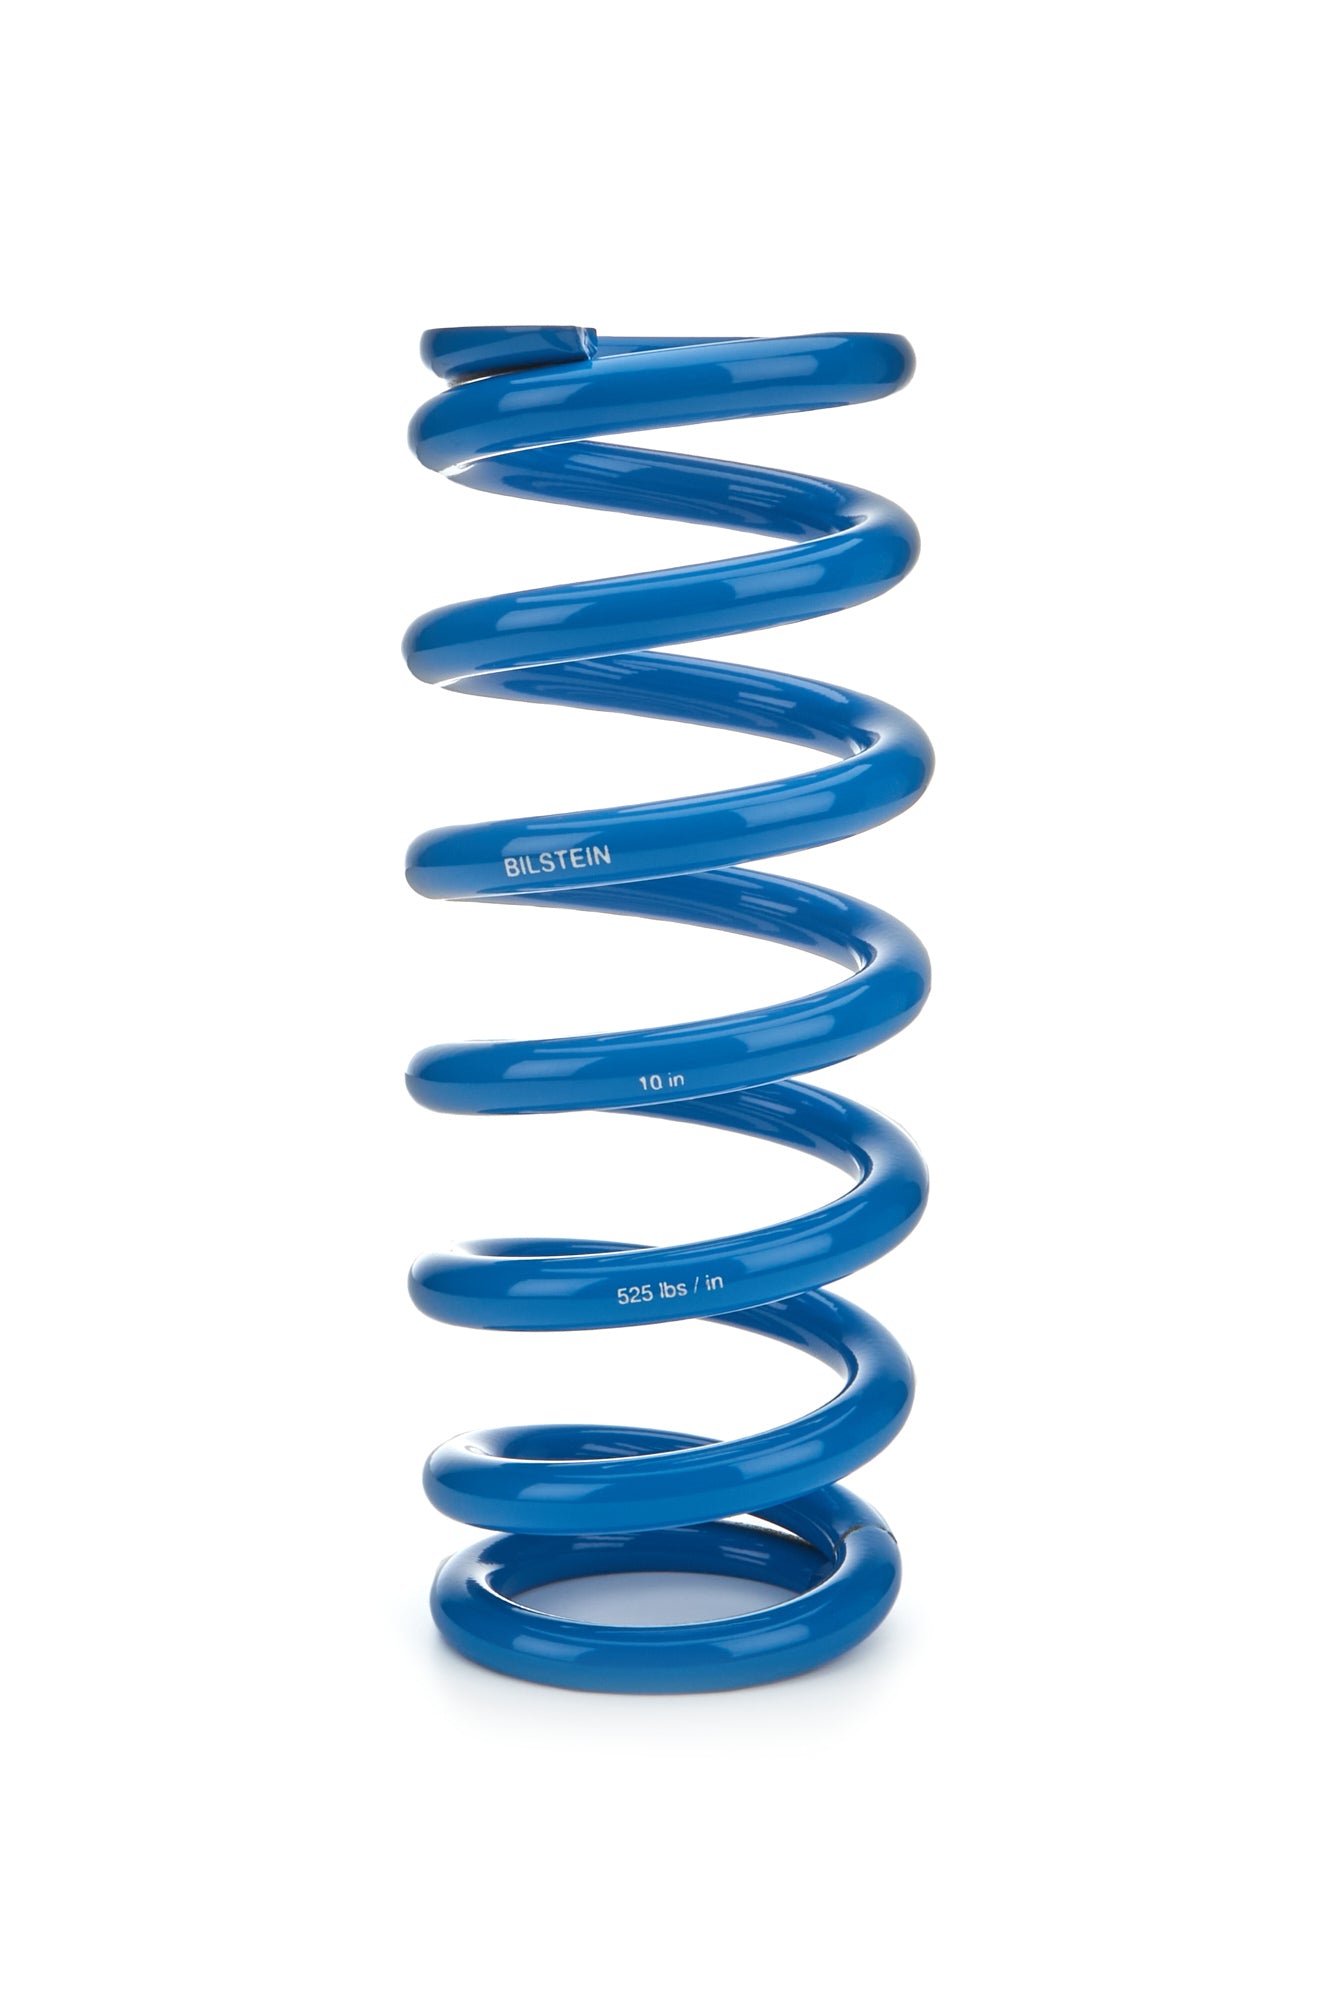 Bilstein Spring  DLM 10in 525 lbs  Springs and Components Coil Springs main image